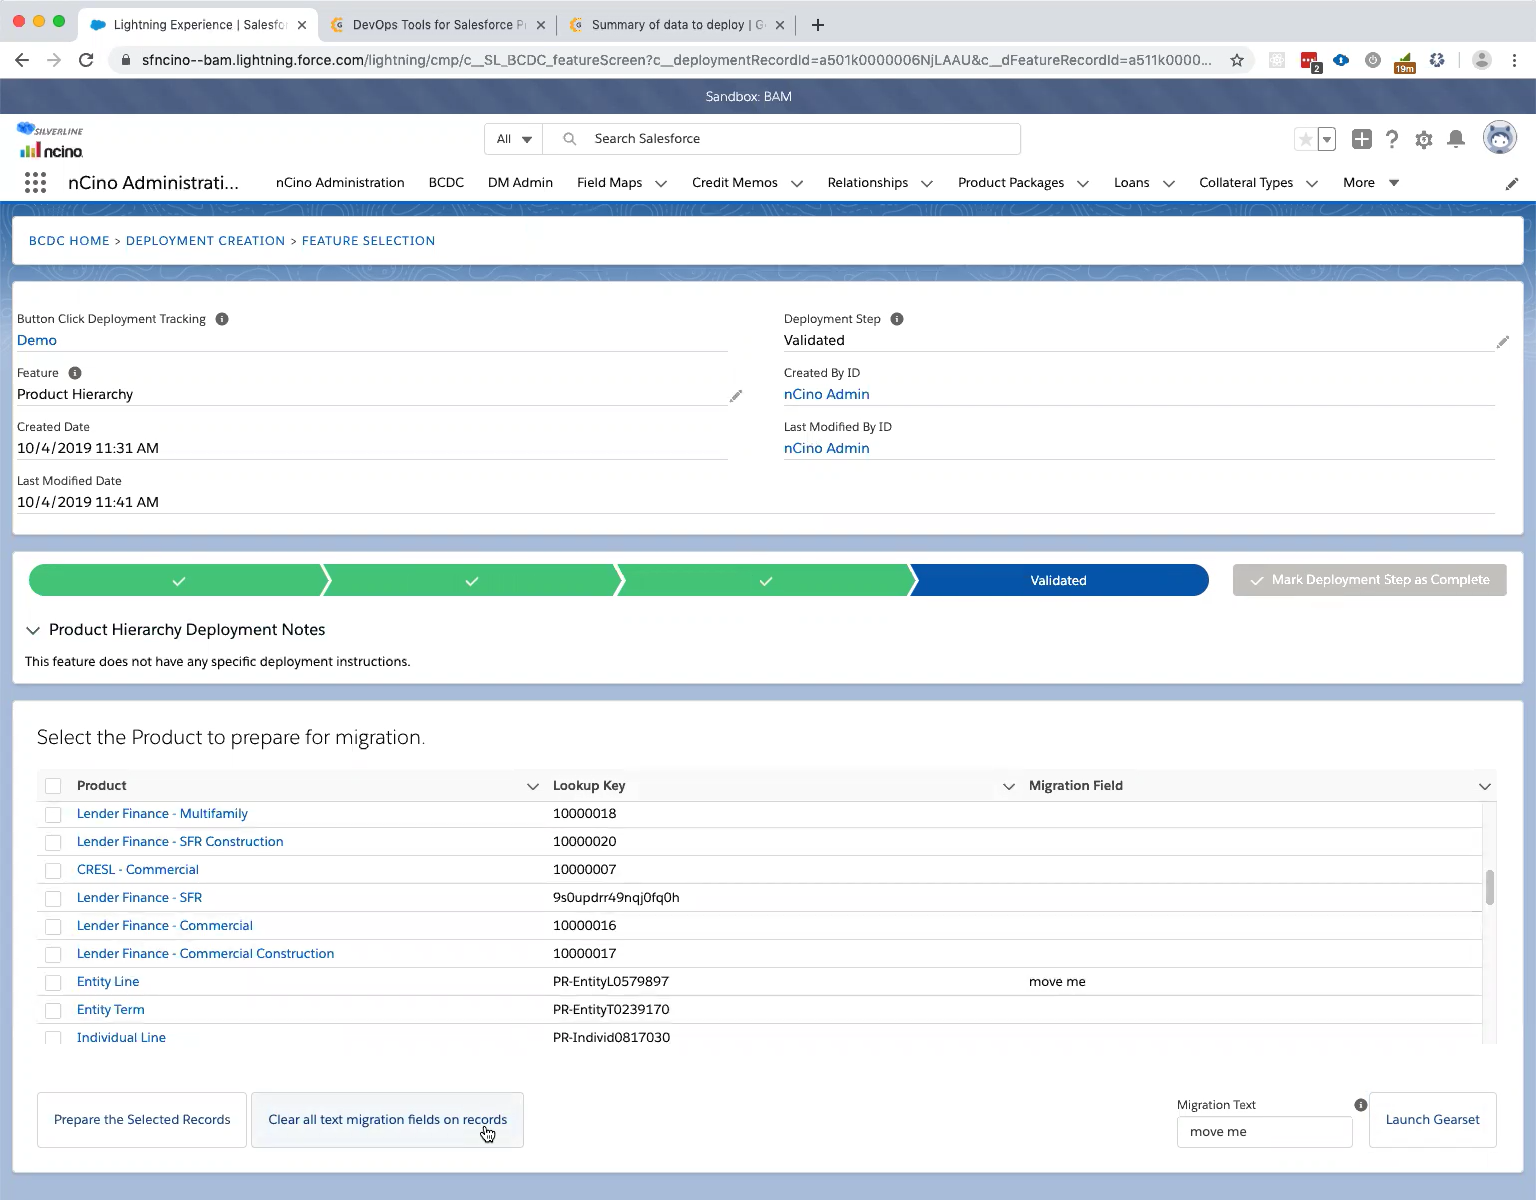 Improved nCino Configuration Time within Salesforce Orgs 5